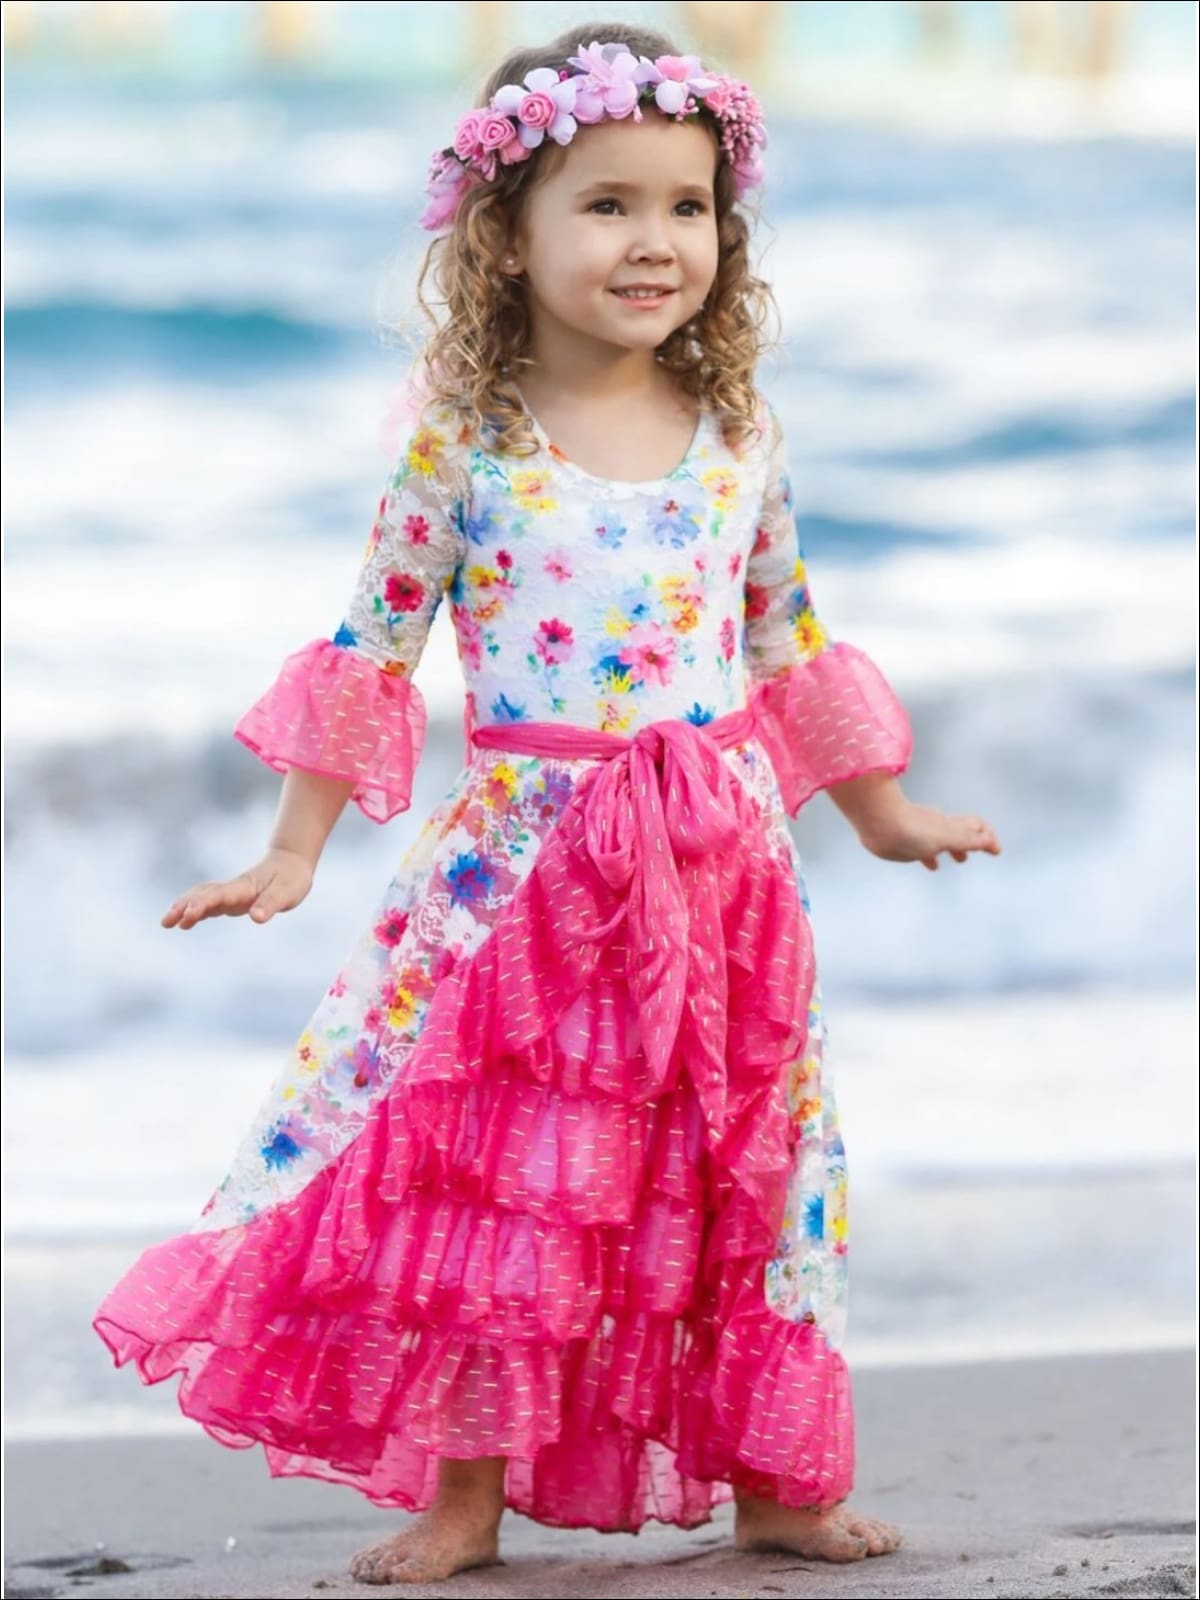 Girls Lace Bell Sleeve Tiered Ruffled Dress with Sash - Fuchsia / 2T/3T - Girls Spring Dressy Dress